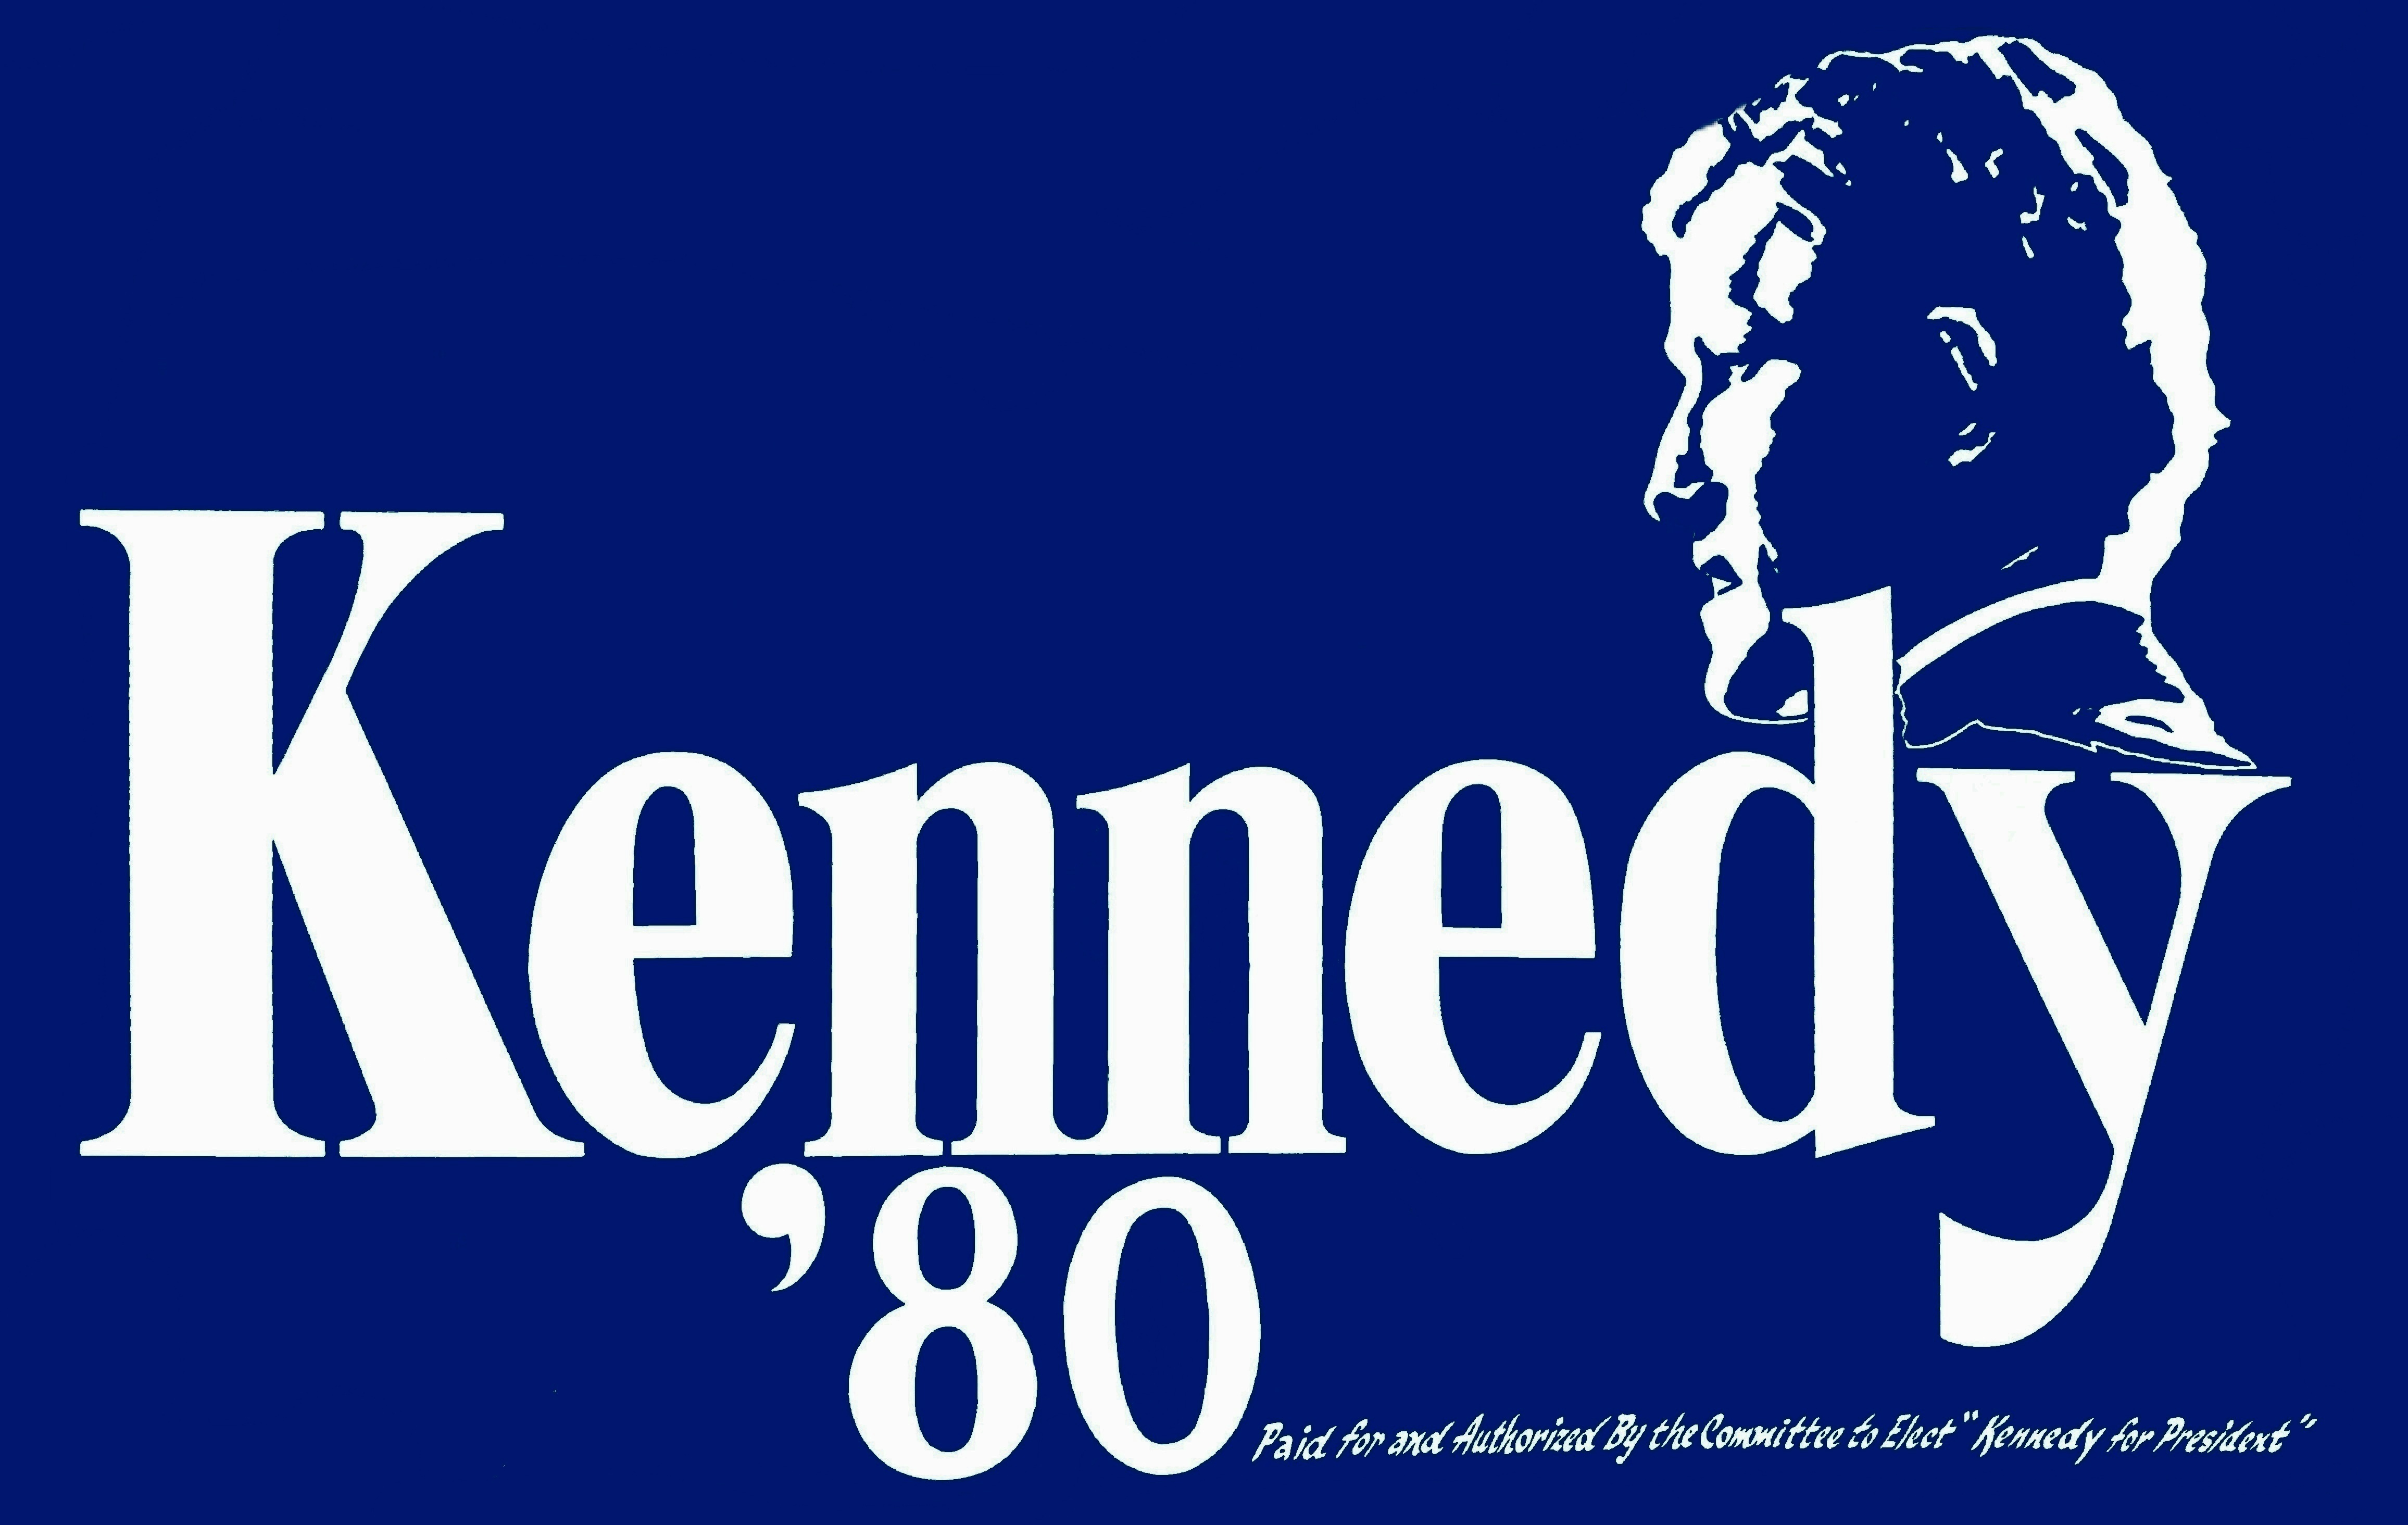 Ted Kennedy 1980 presidential campaign - Wikipedia